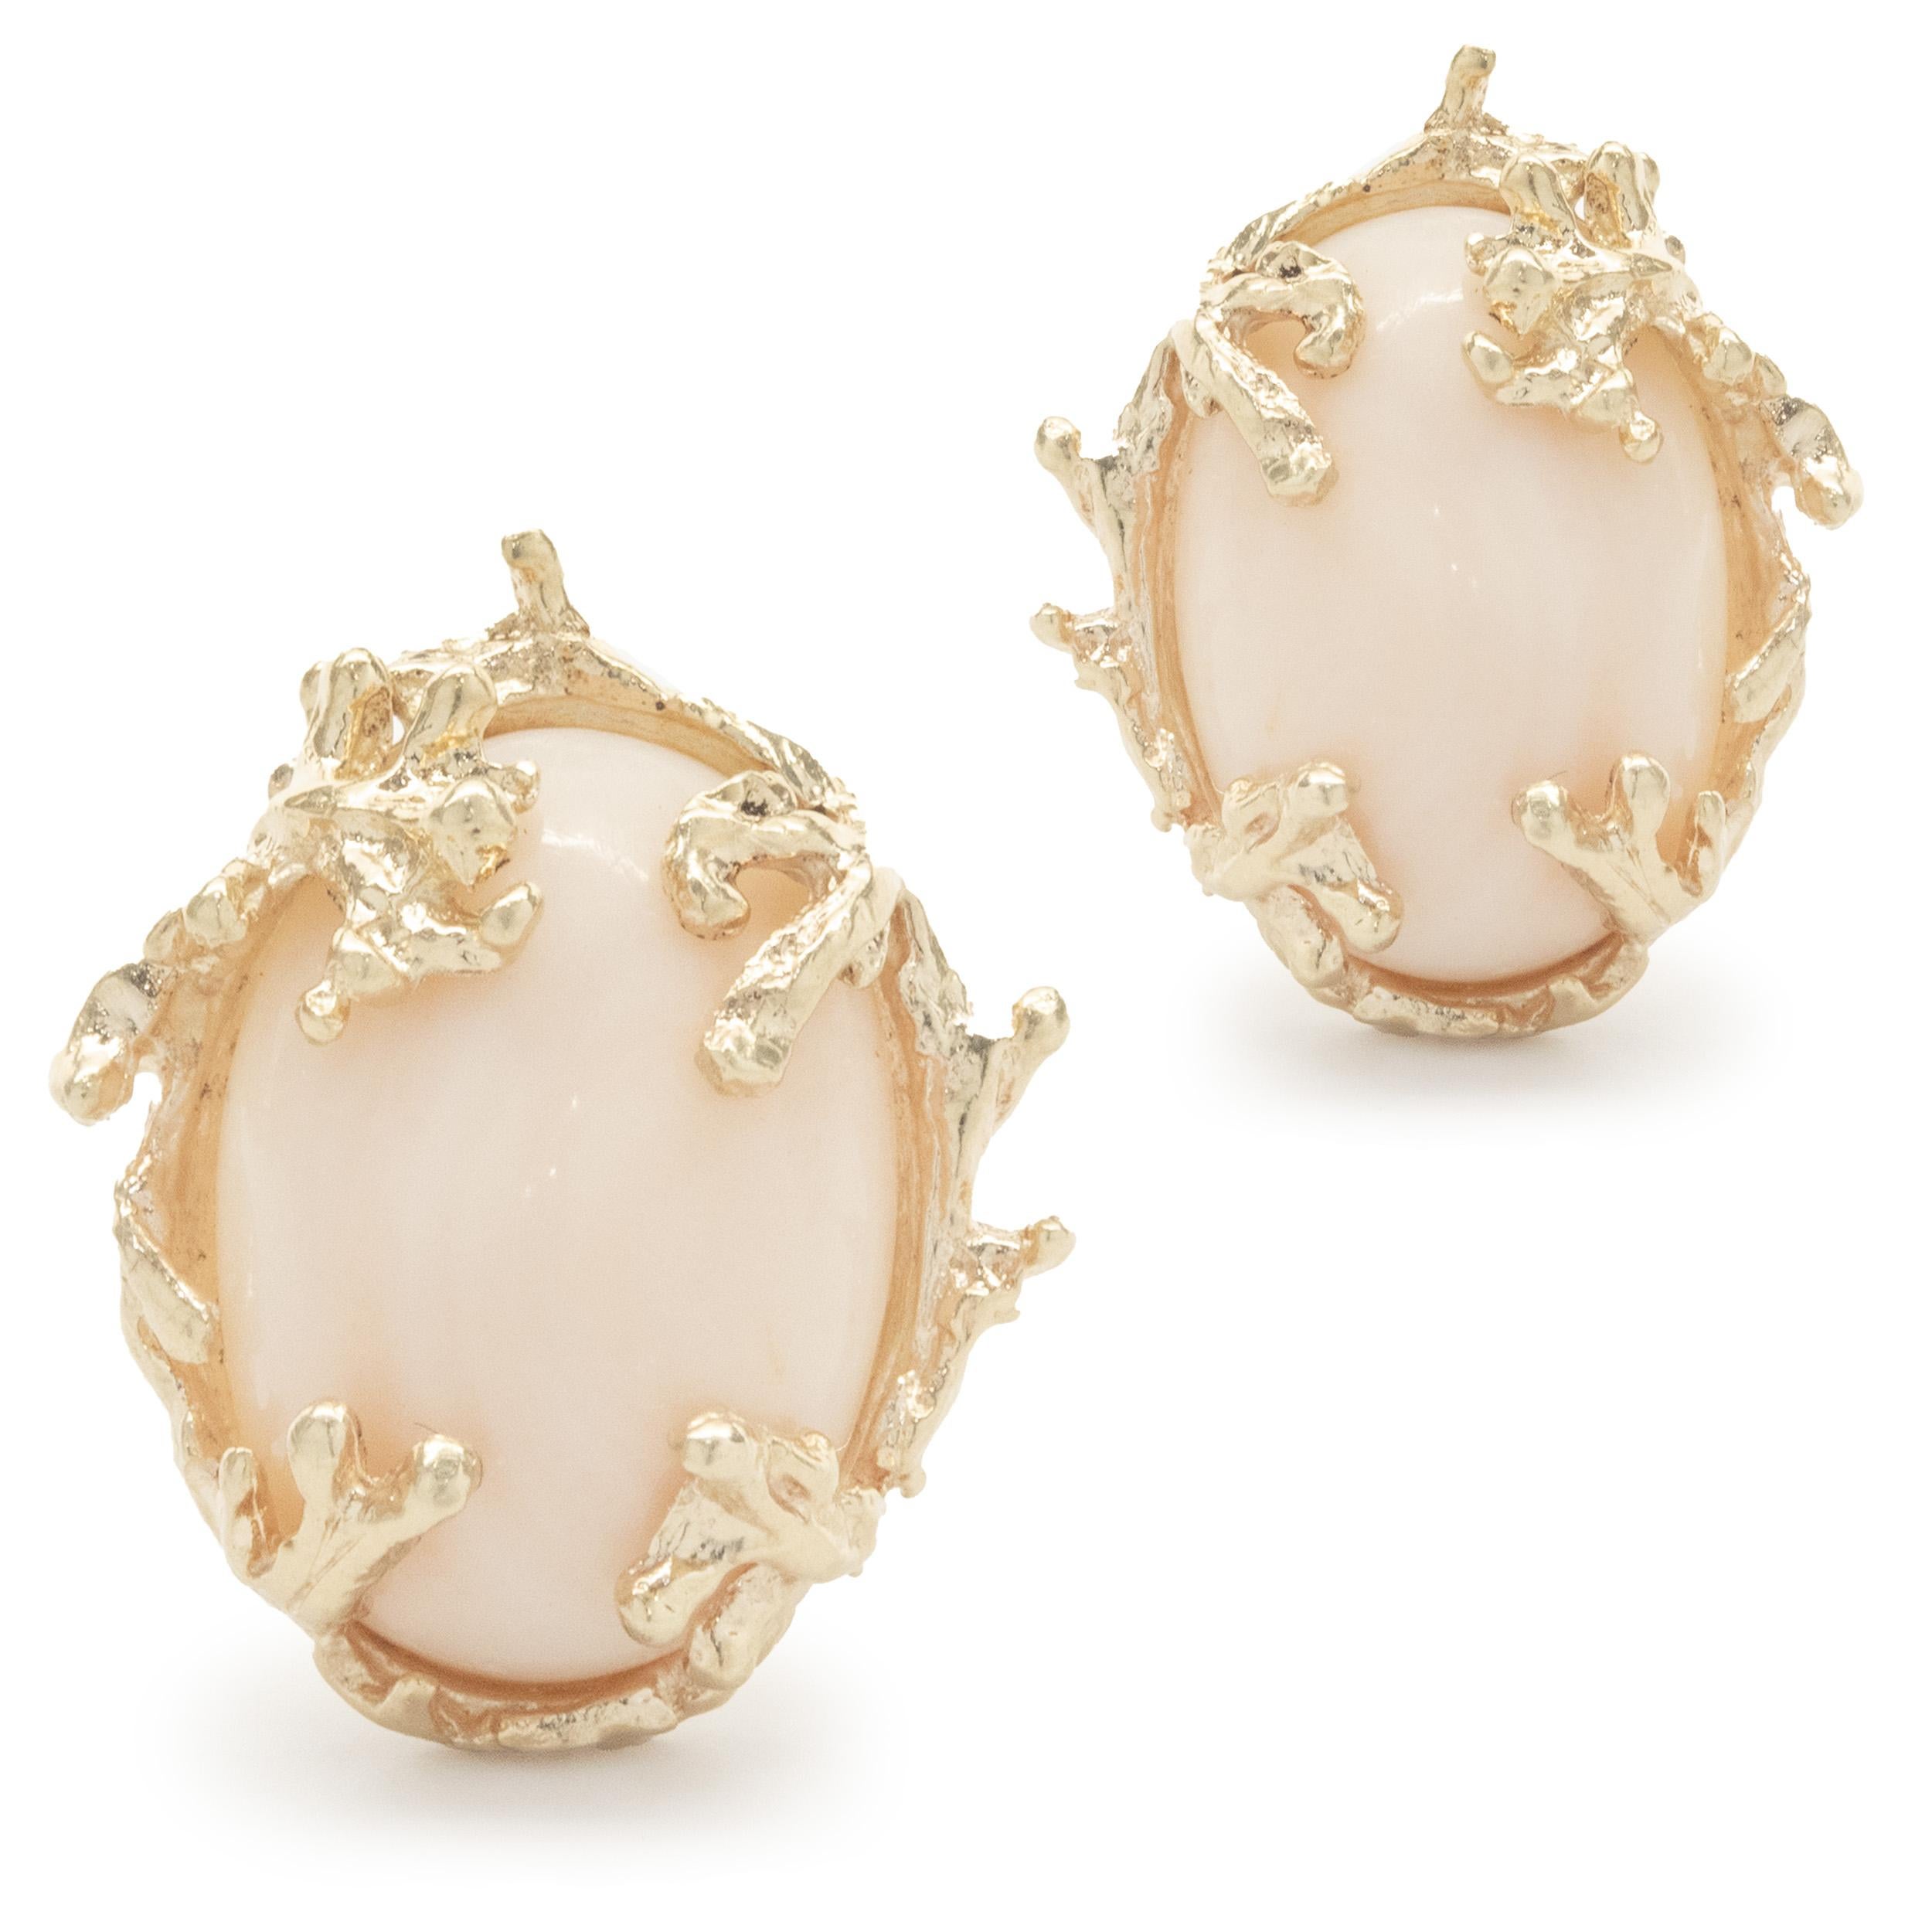 14 Karat Yellow Gold Vintage Angel Skin Coral Freeform Earrings

Material: 14K yellow gold
Fastenings: post with omega backs
Weight: 12.70 grams